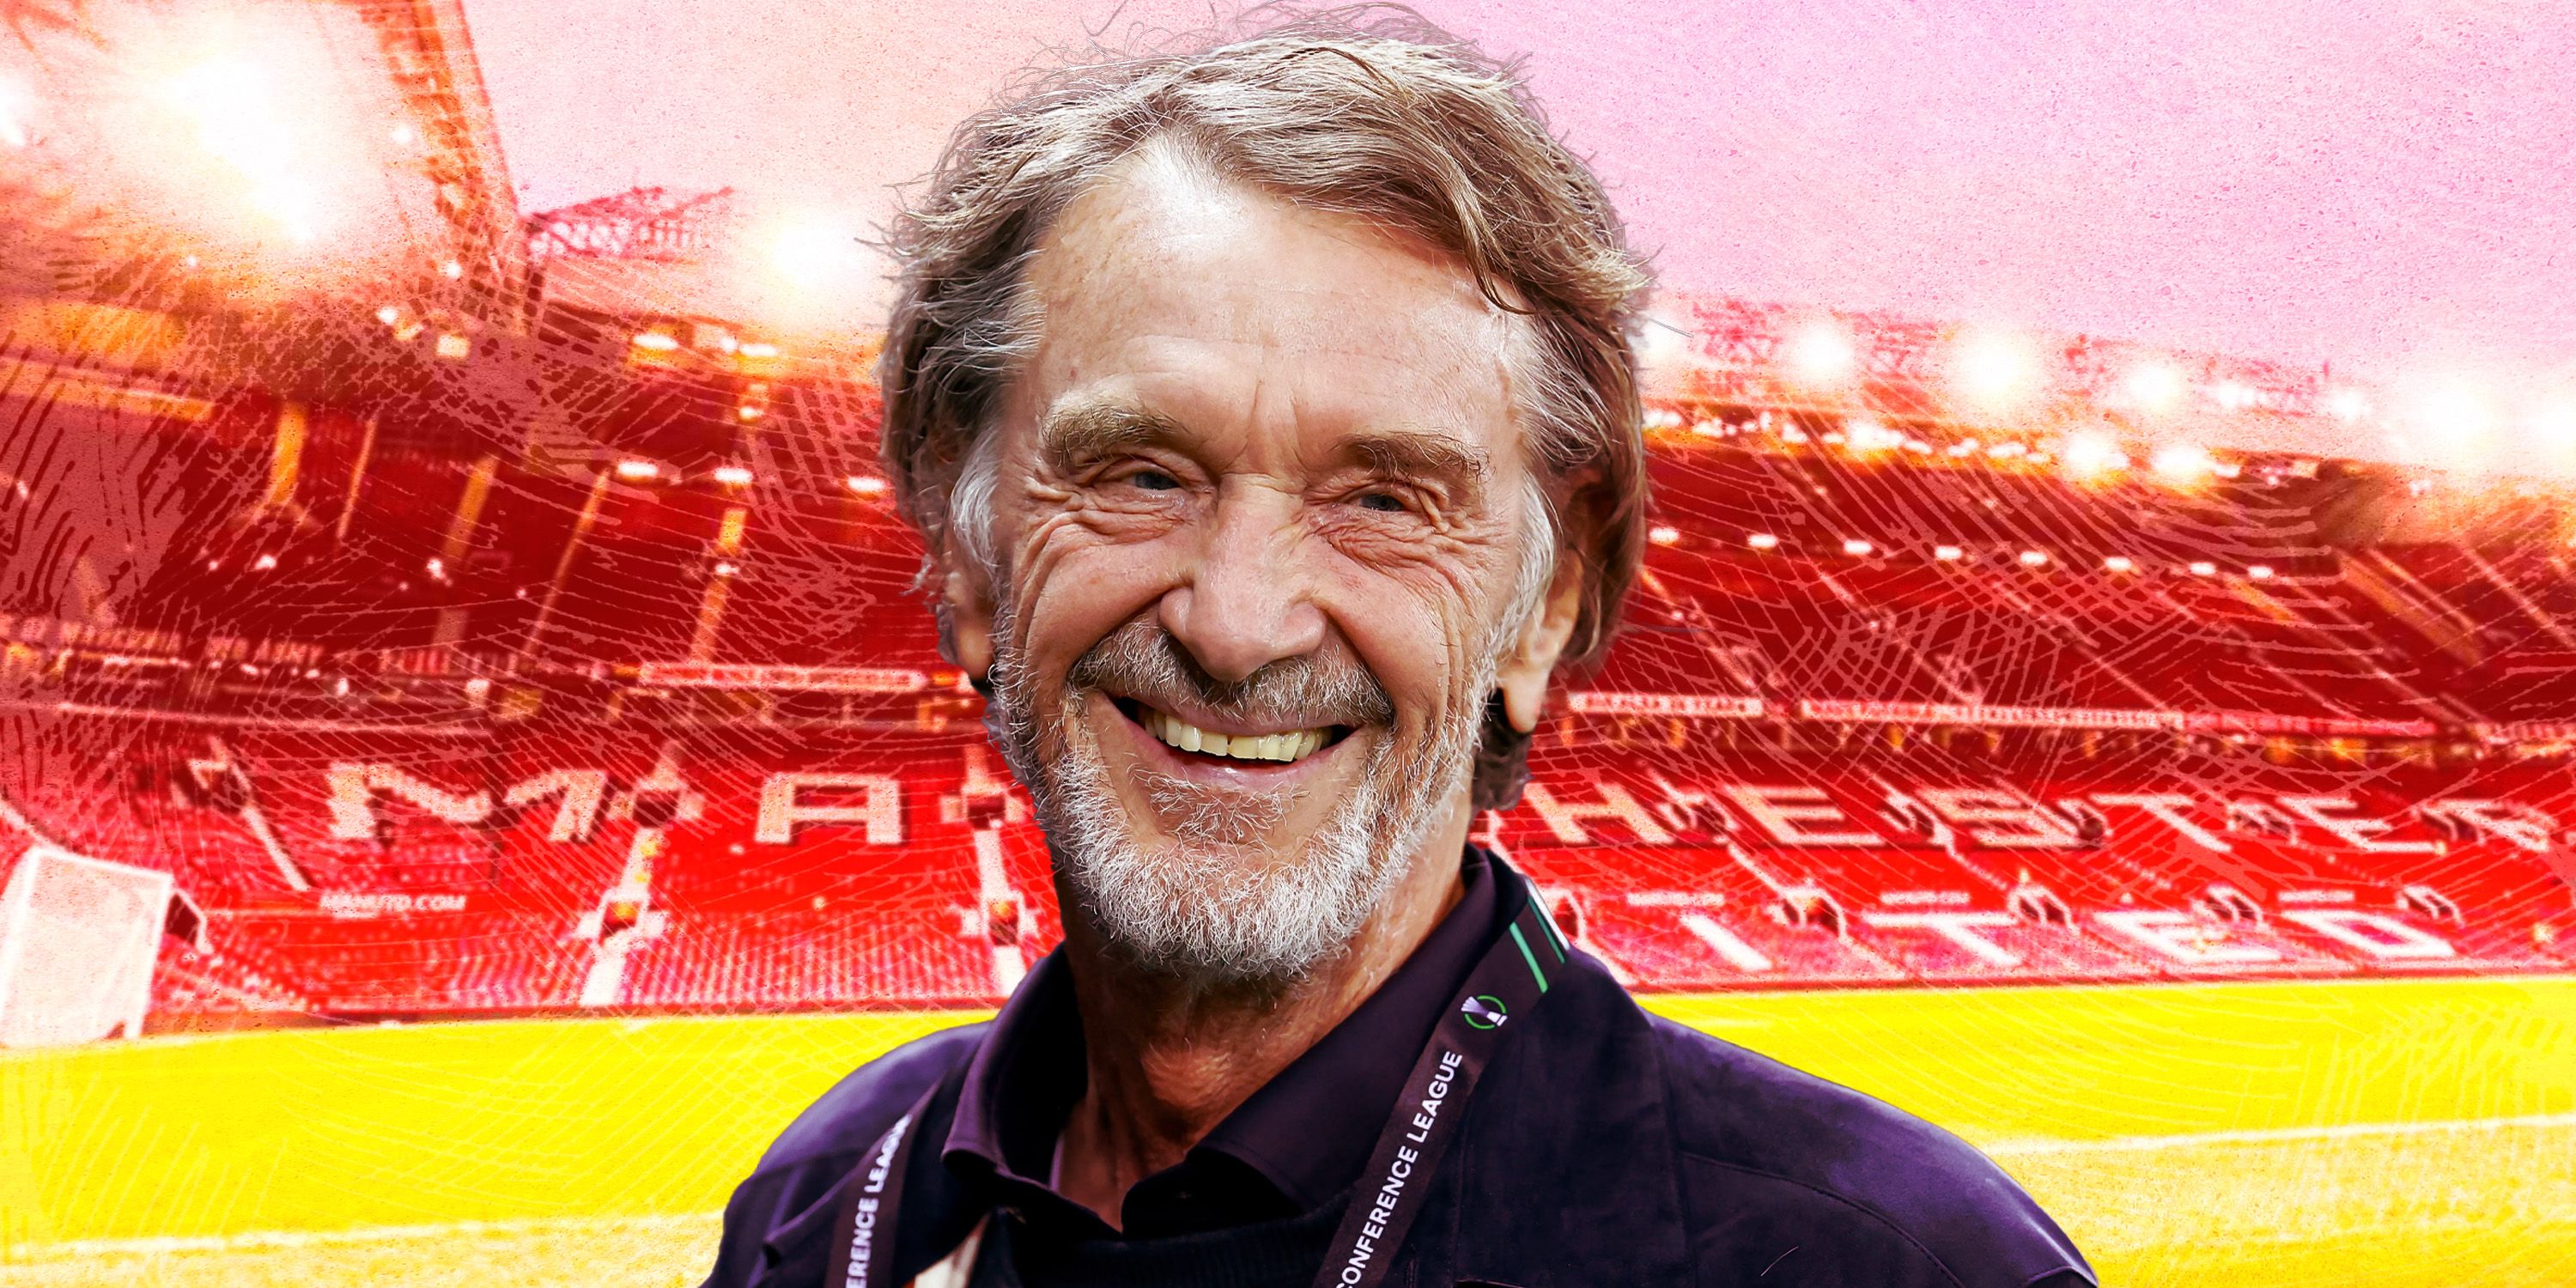 Sir Jim Ratcliffe and INEOS Old Trafford Plans for Man Utd